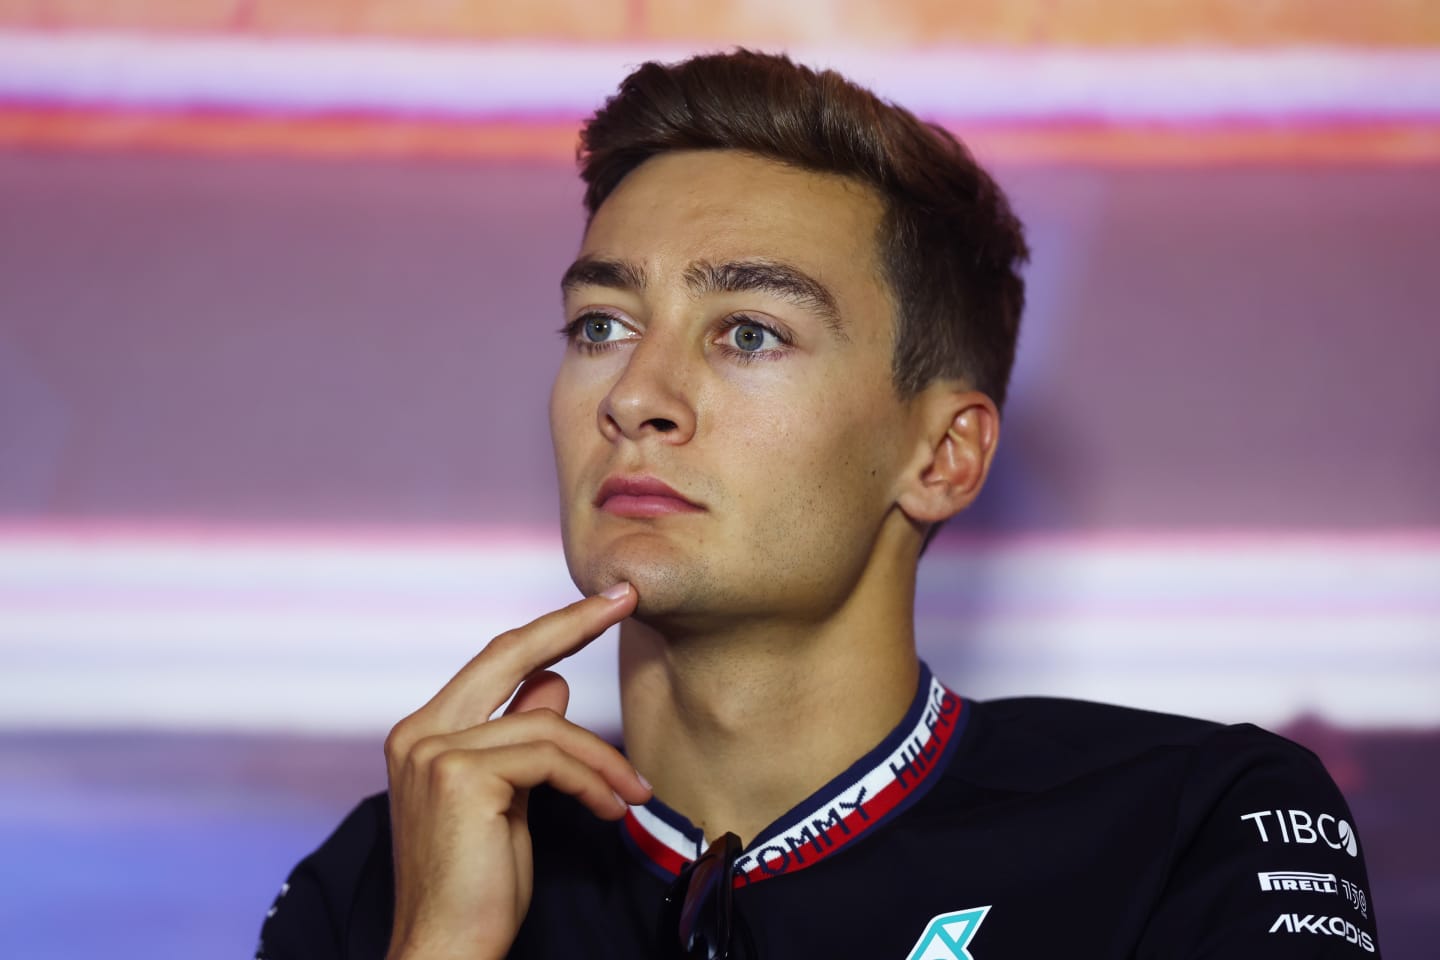 ZANDVOORT, NETHERLANDS - SEPTEMBER 01: George Russell of Great Britain and Mercedes looks on in the Drivers Press Conference during previews ahead of the F1 Grand Prix of The Netherlands at Circuit Zandvoort on September 01, 2022 in Zandvoort, Netherlands. (Photo by Lars Baron/Getty Images)